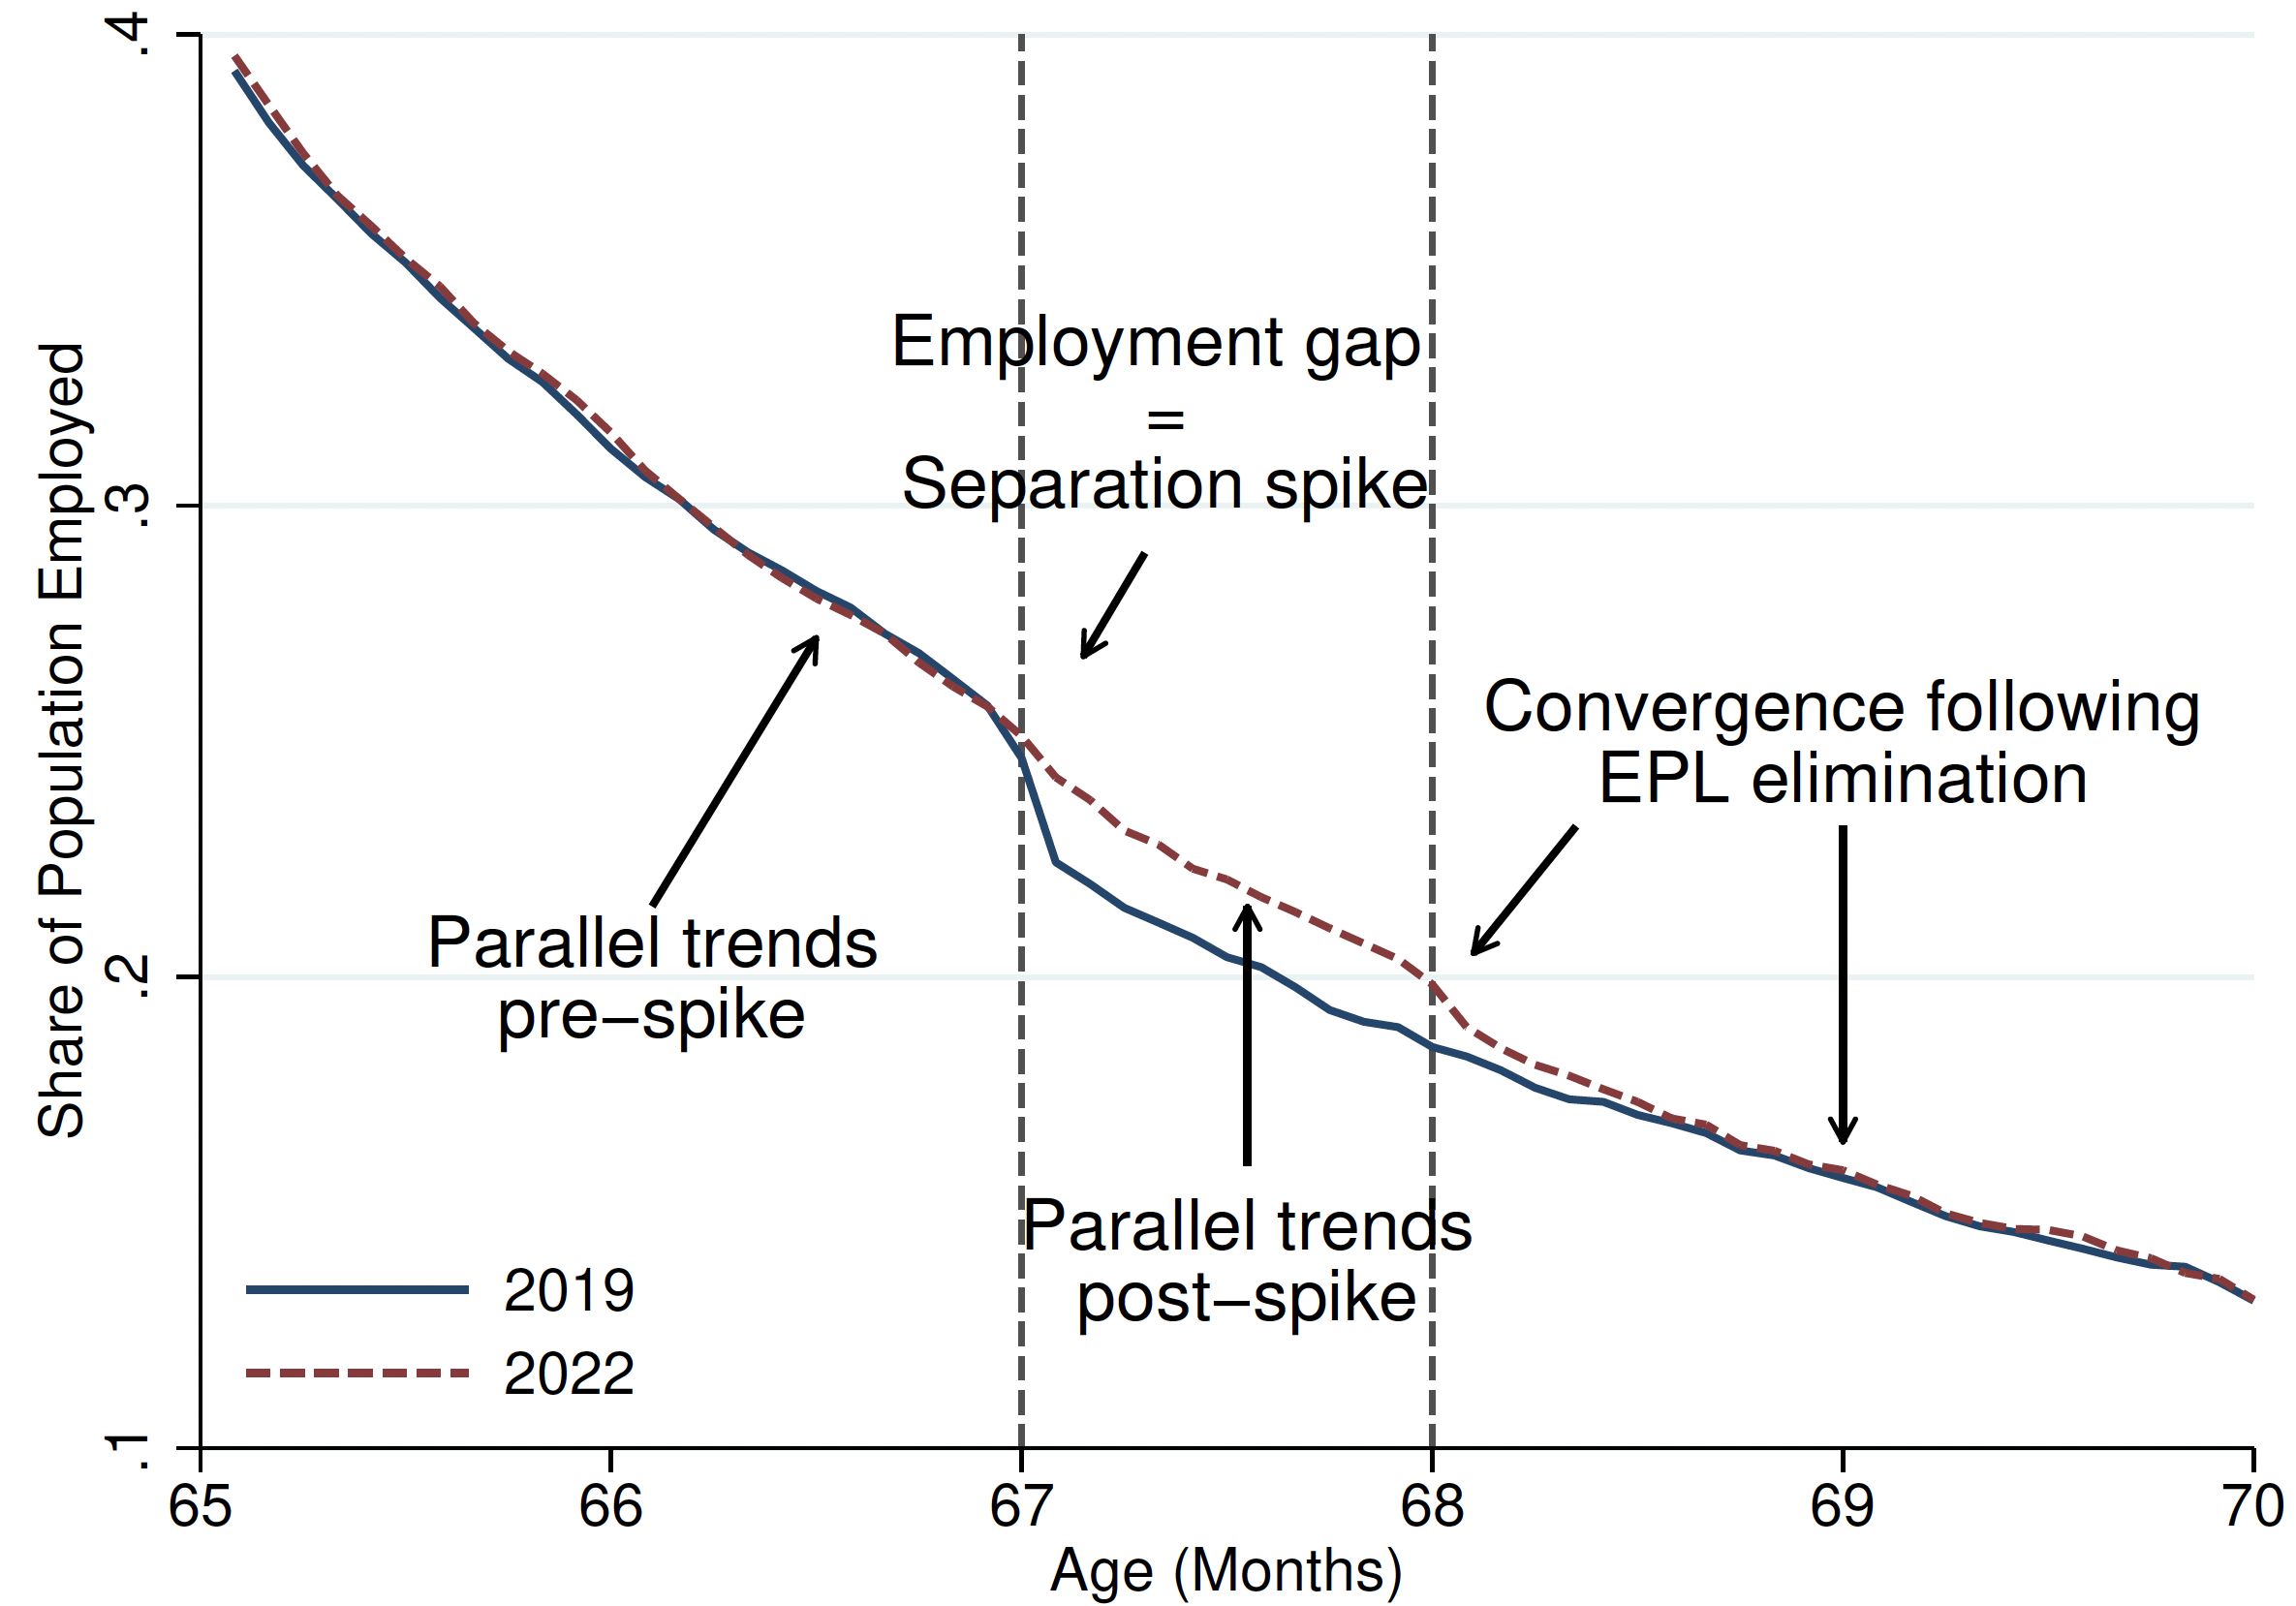 Figure 8 Difference-in-difference comparison of two employment protection legislation regimes: 2019 (cut-off age: 67) and 2022 (cut-off age: 68)